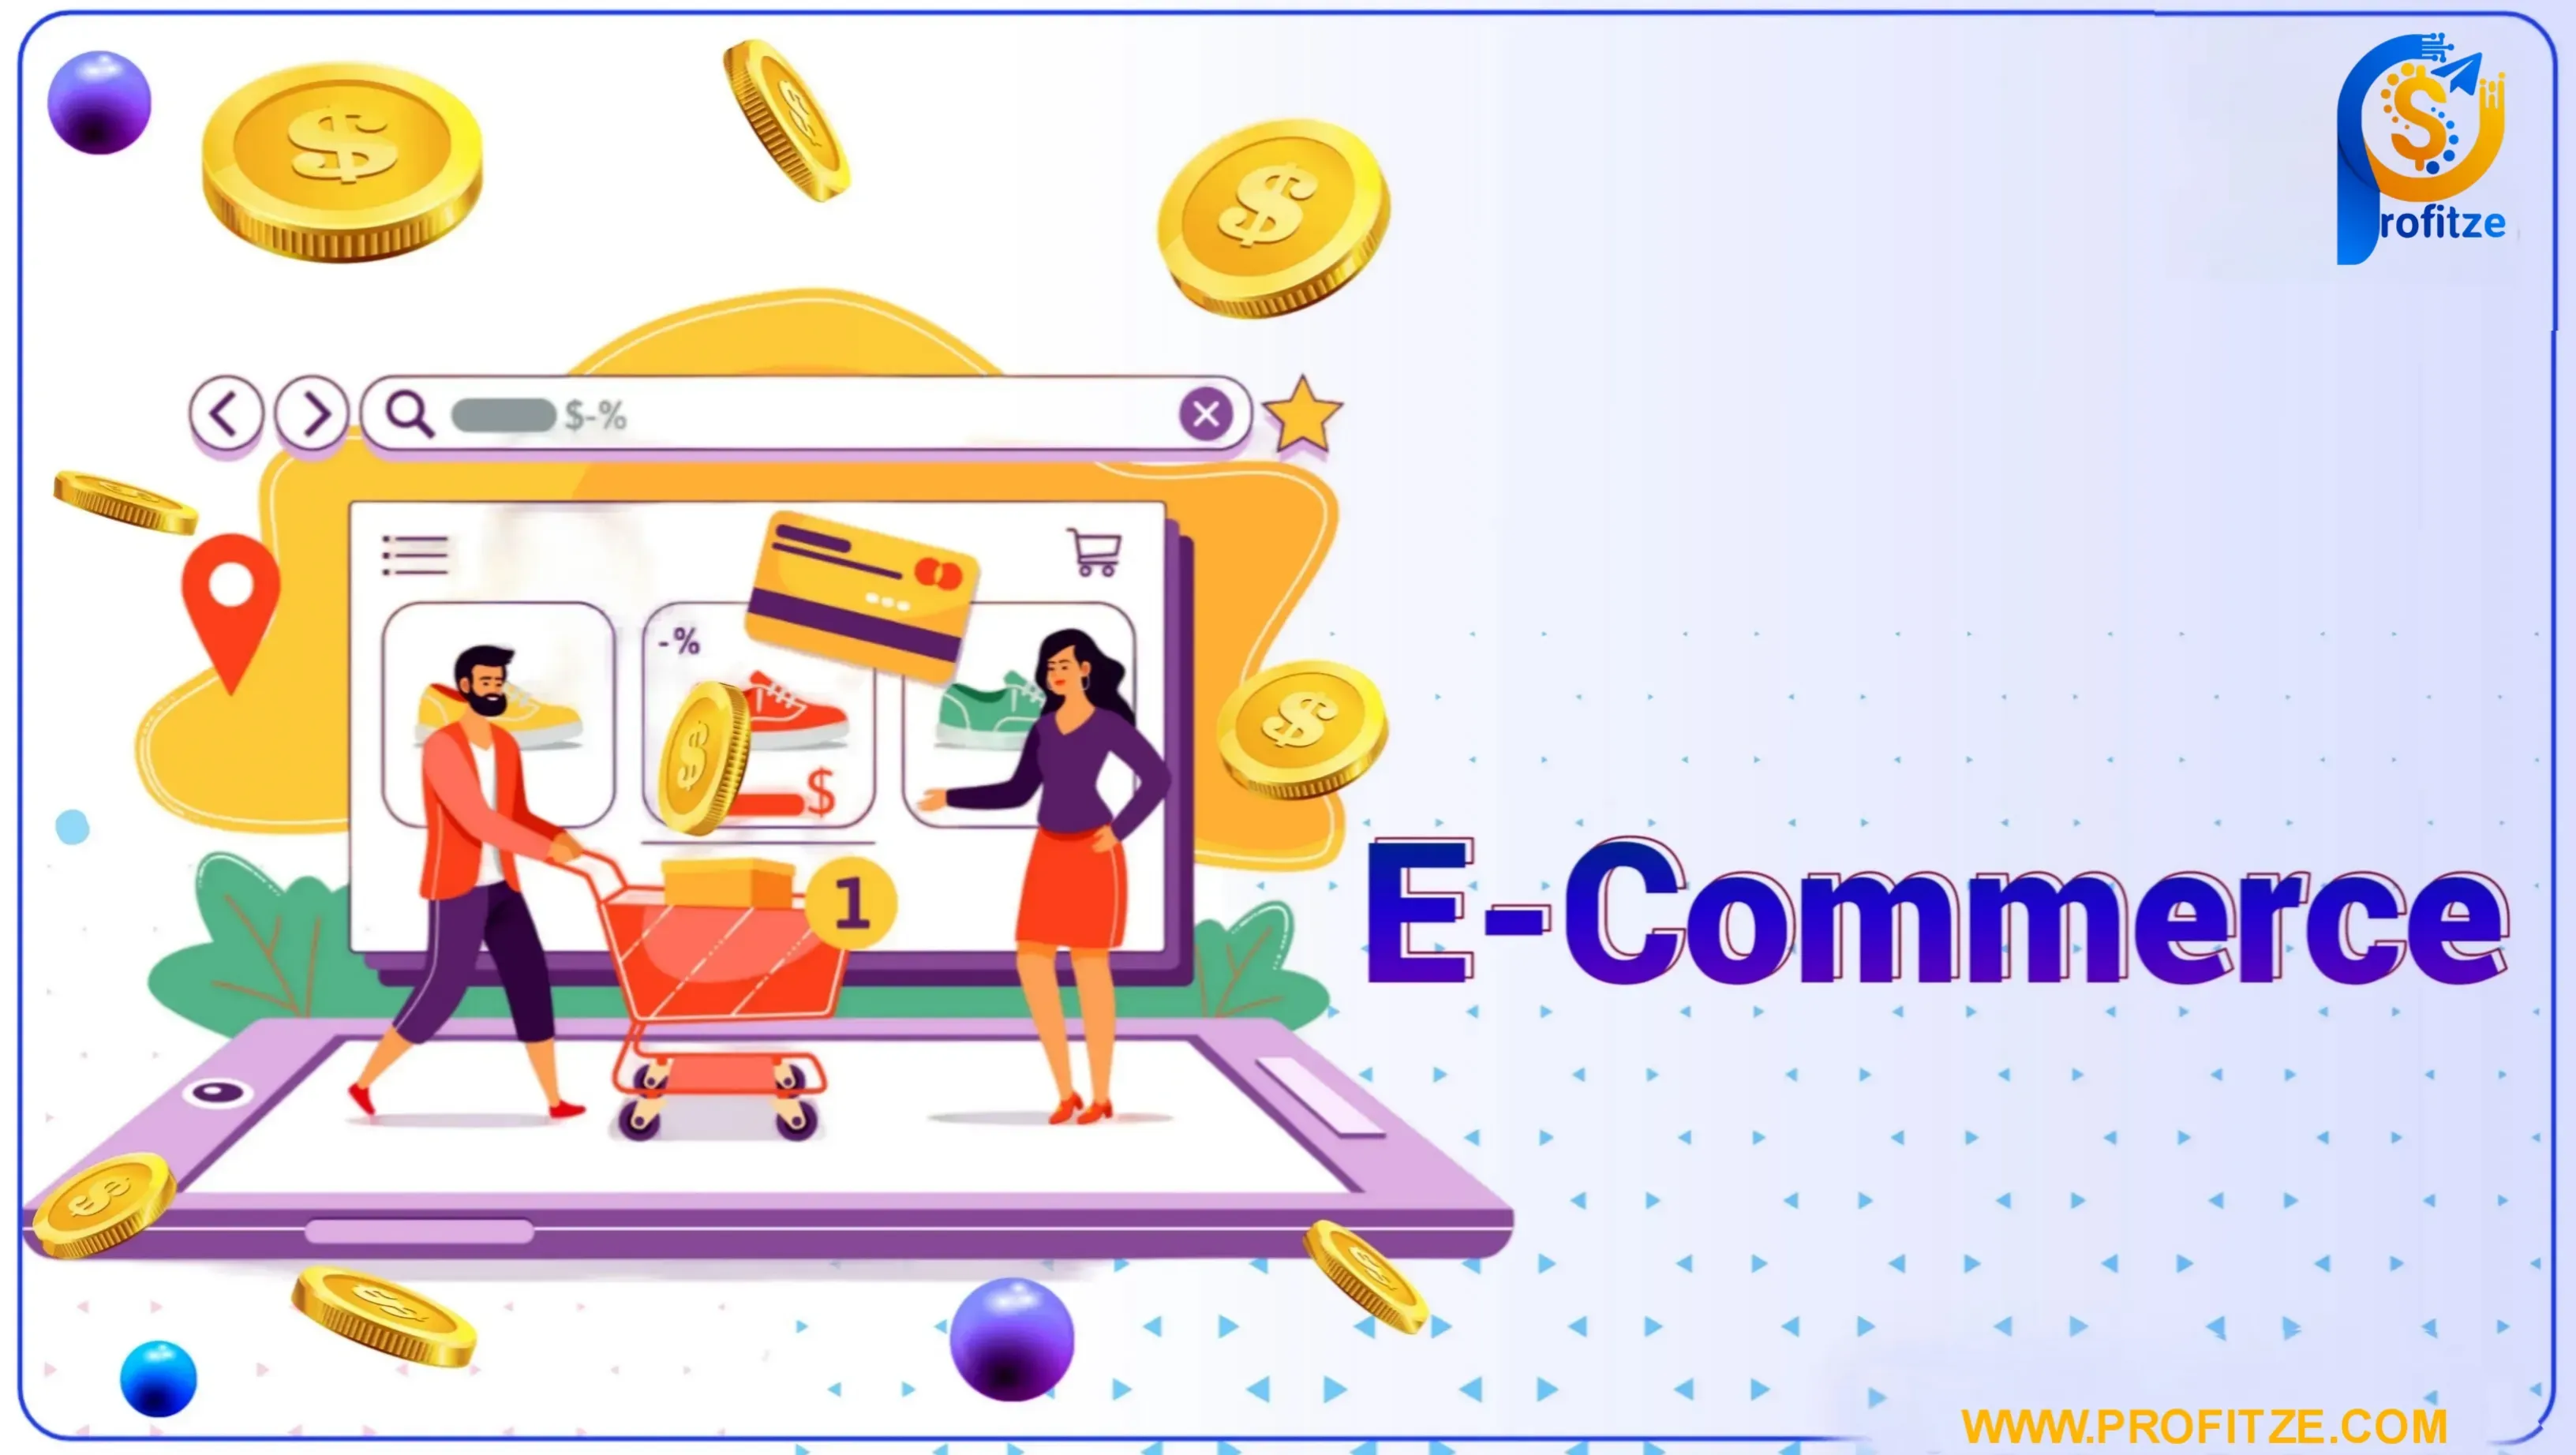 Profit from electronic commerce